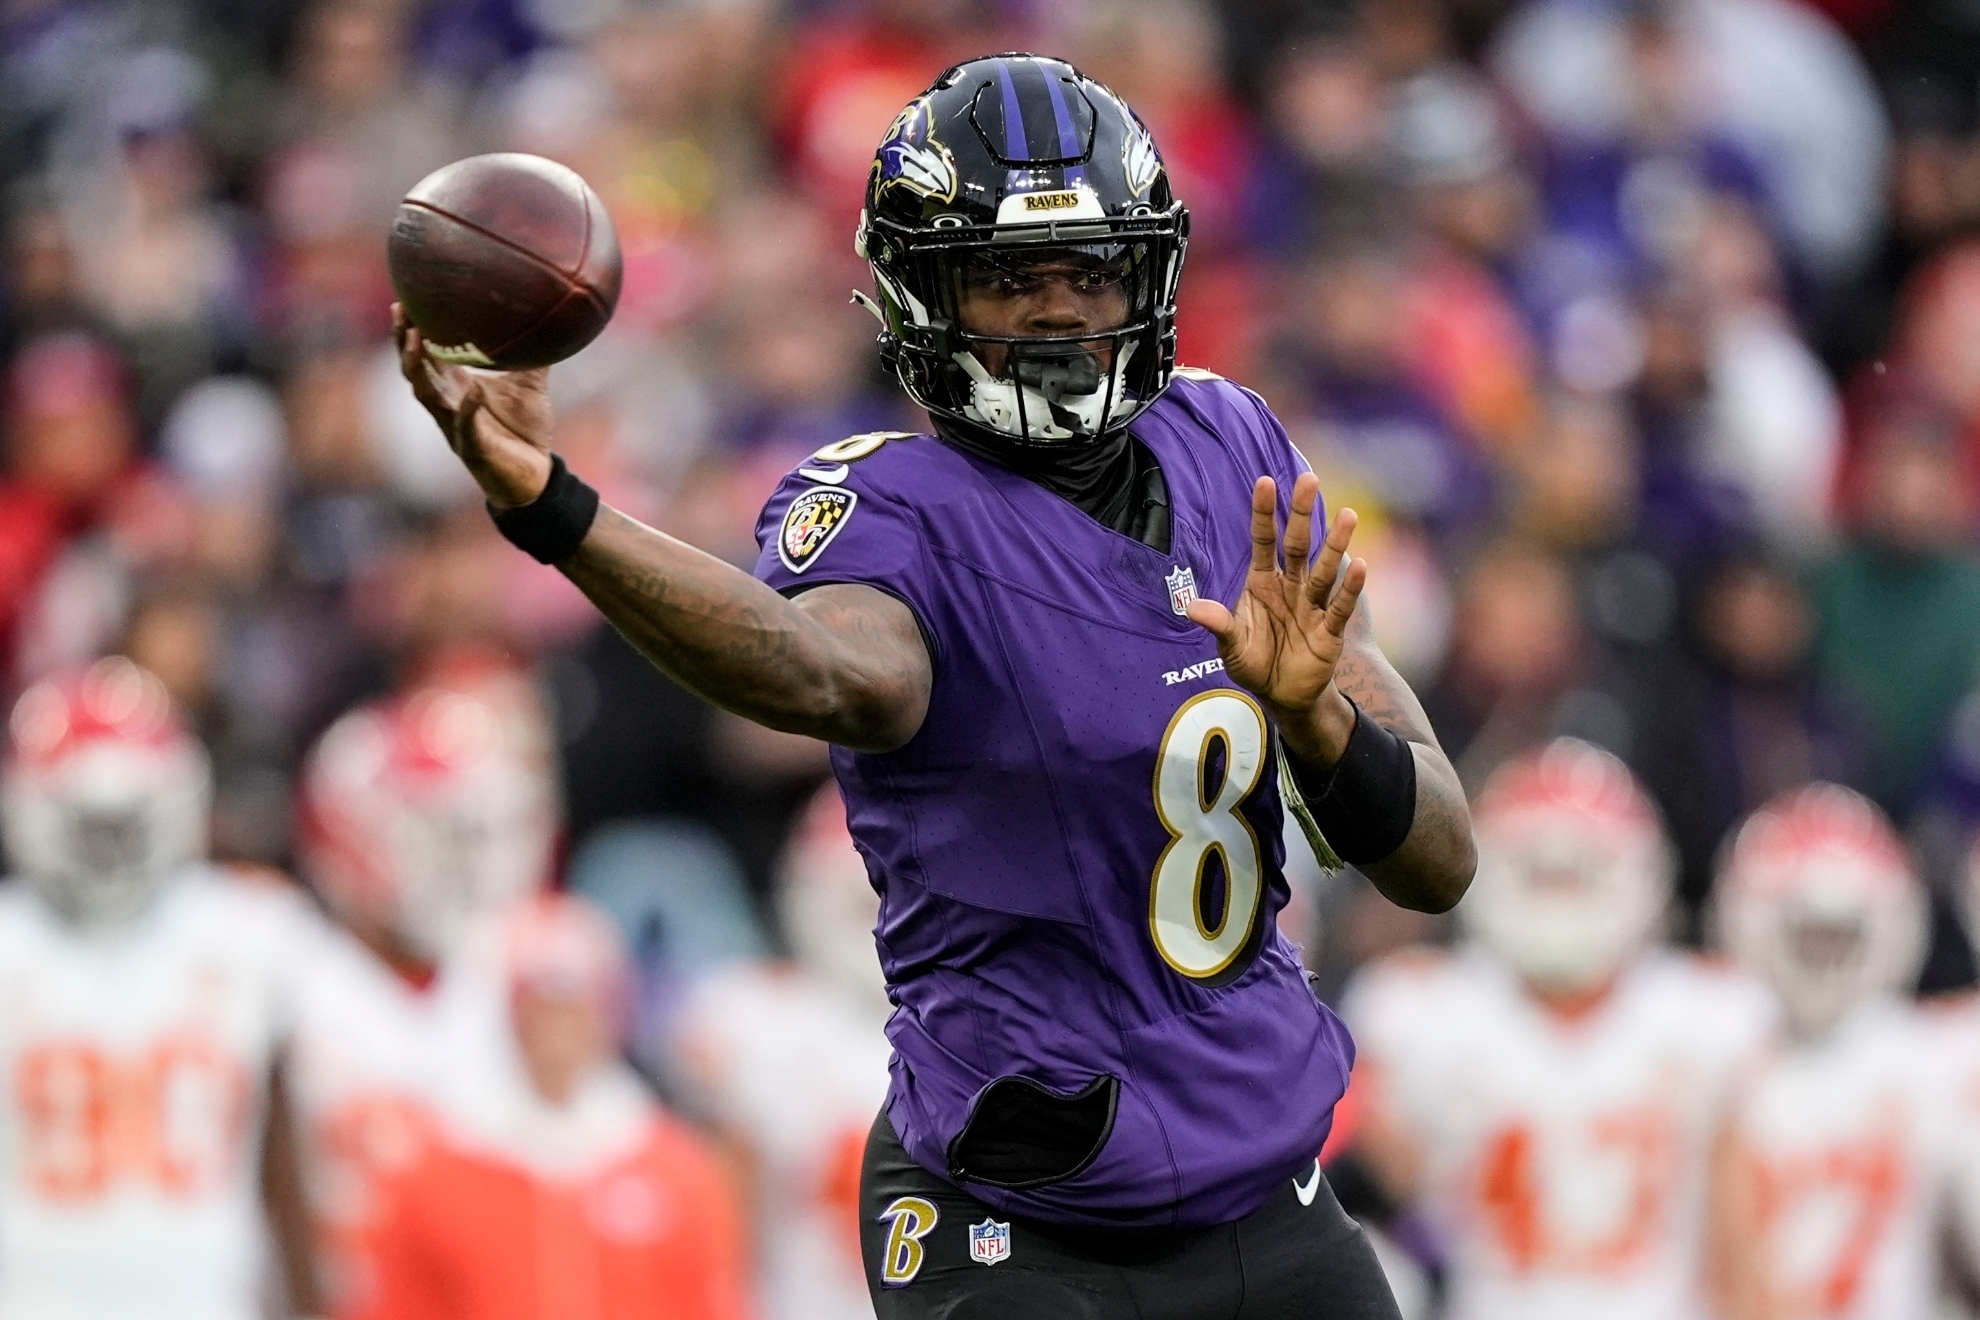 Lamar Jackson playing for the Ravens